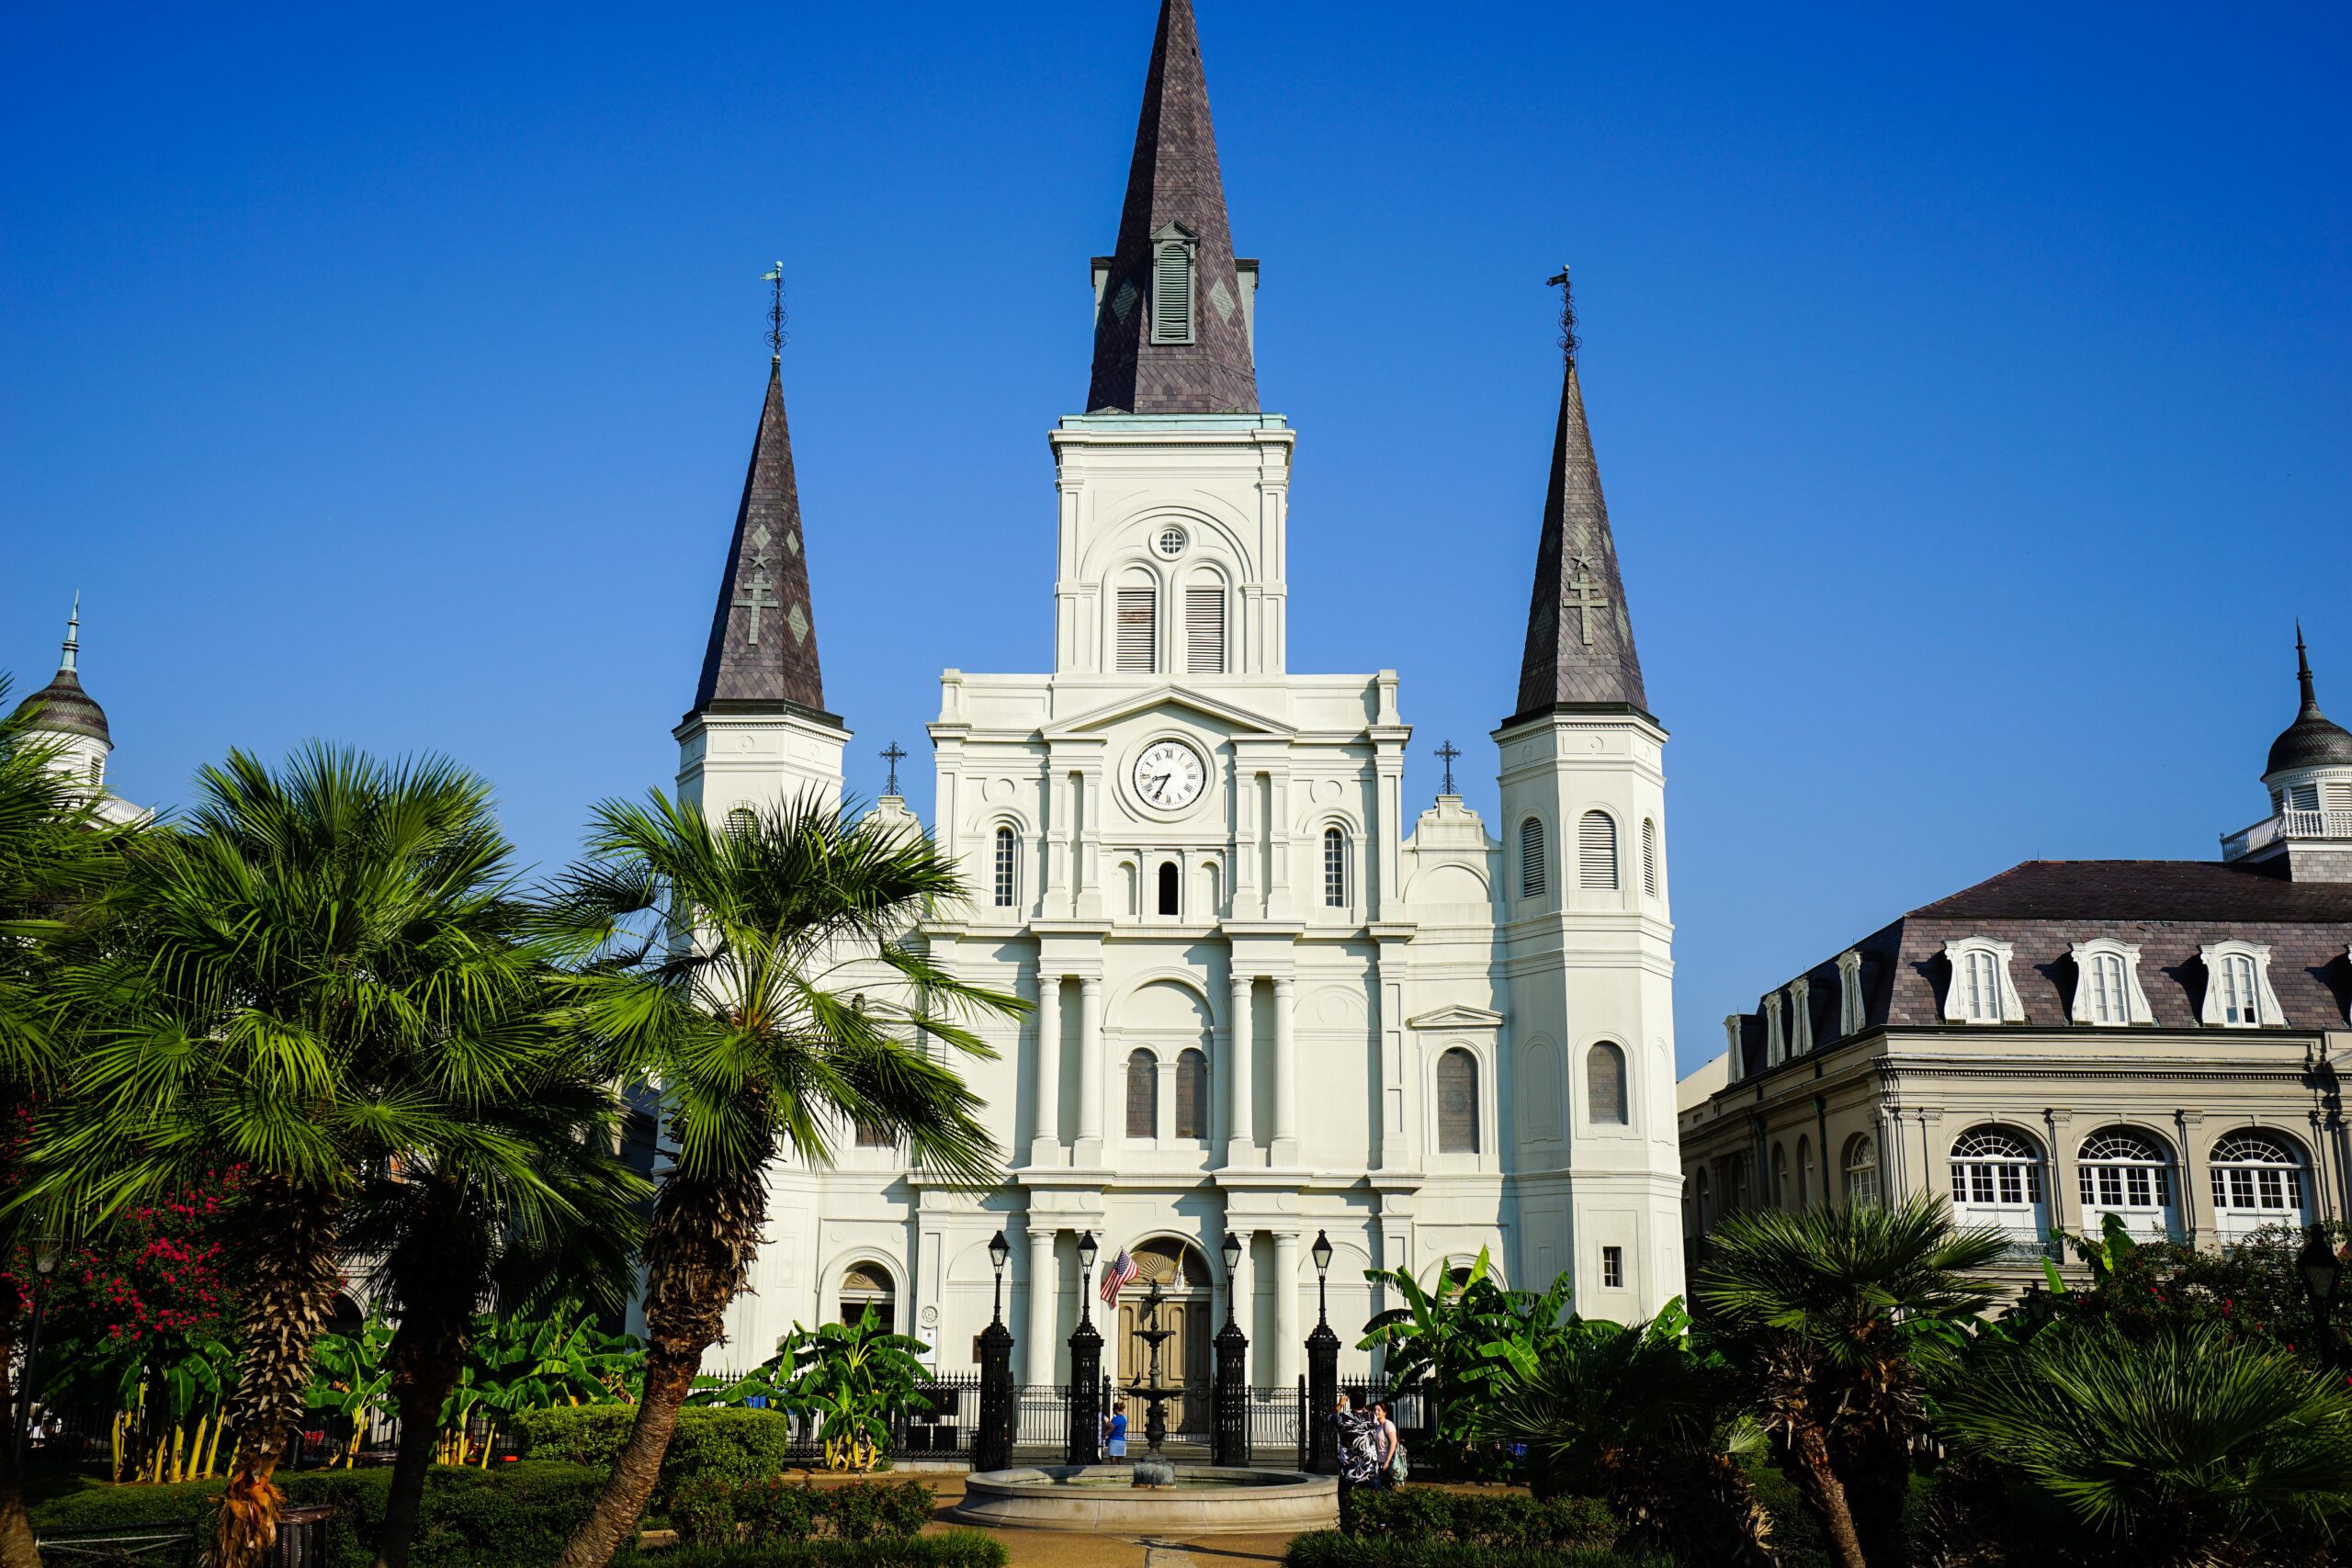 7 Must-See Historical Sites in New Orleans - Hotel Monteleone